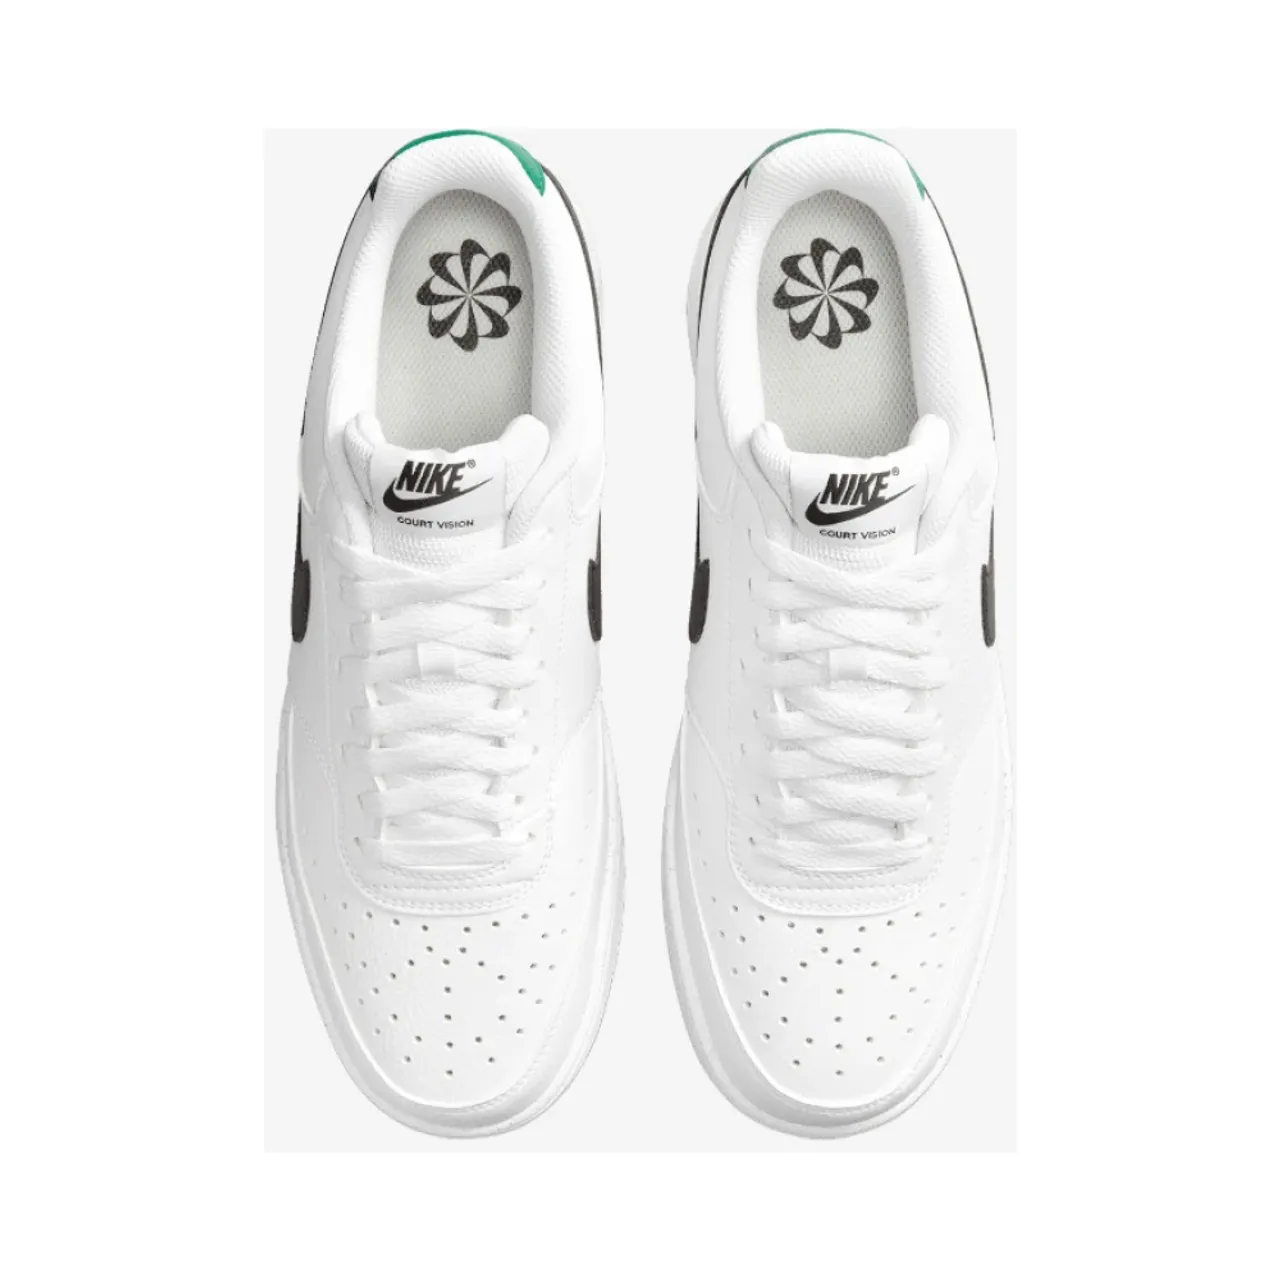 Nike , White Sneakers with Materials and Retro Design ,White male, Sizes: